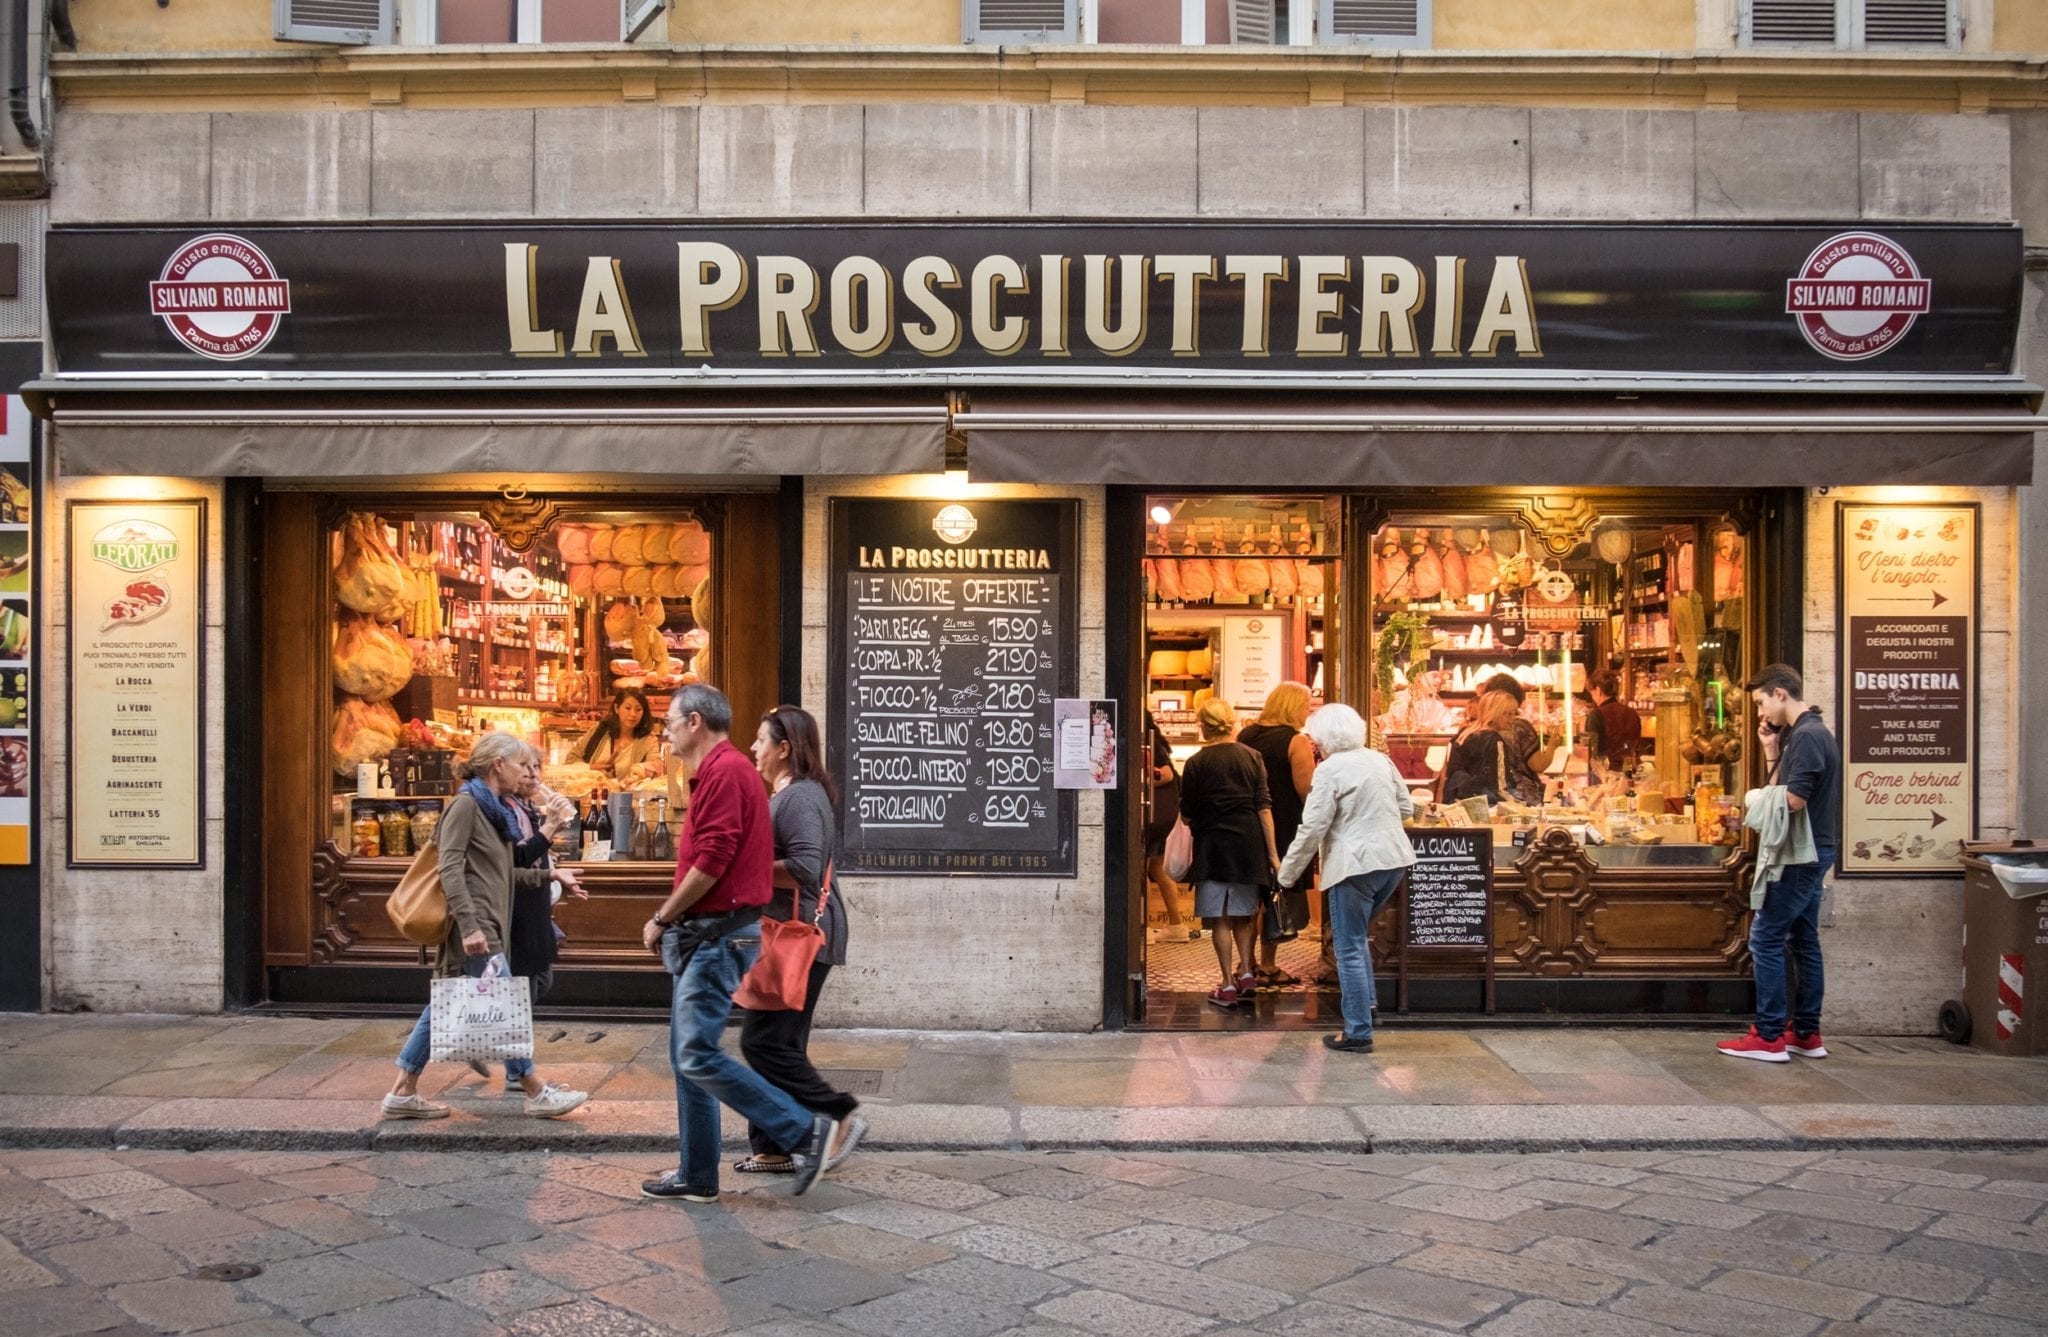 A butcher shop reading "La Prosciutteria" with people walking in front of it in Parma, Italy.